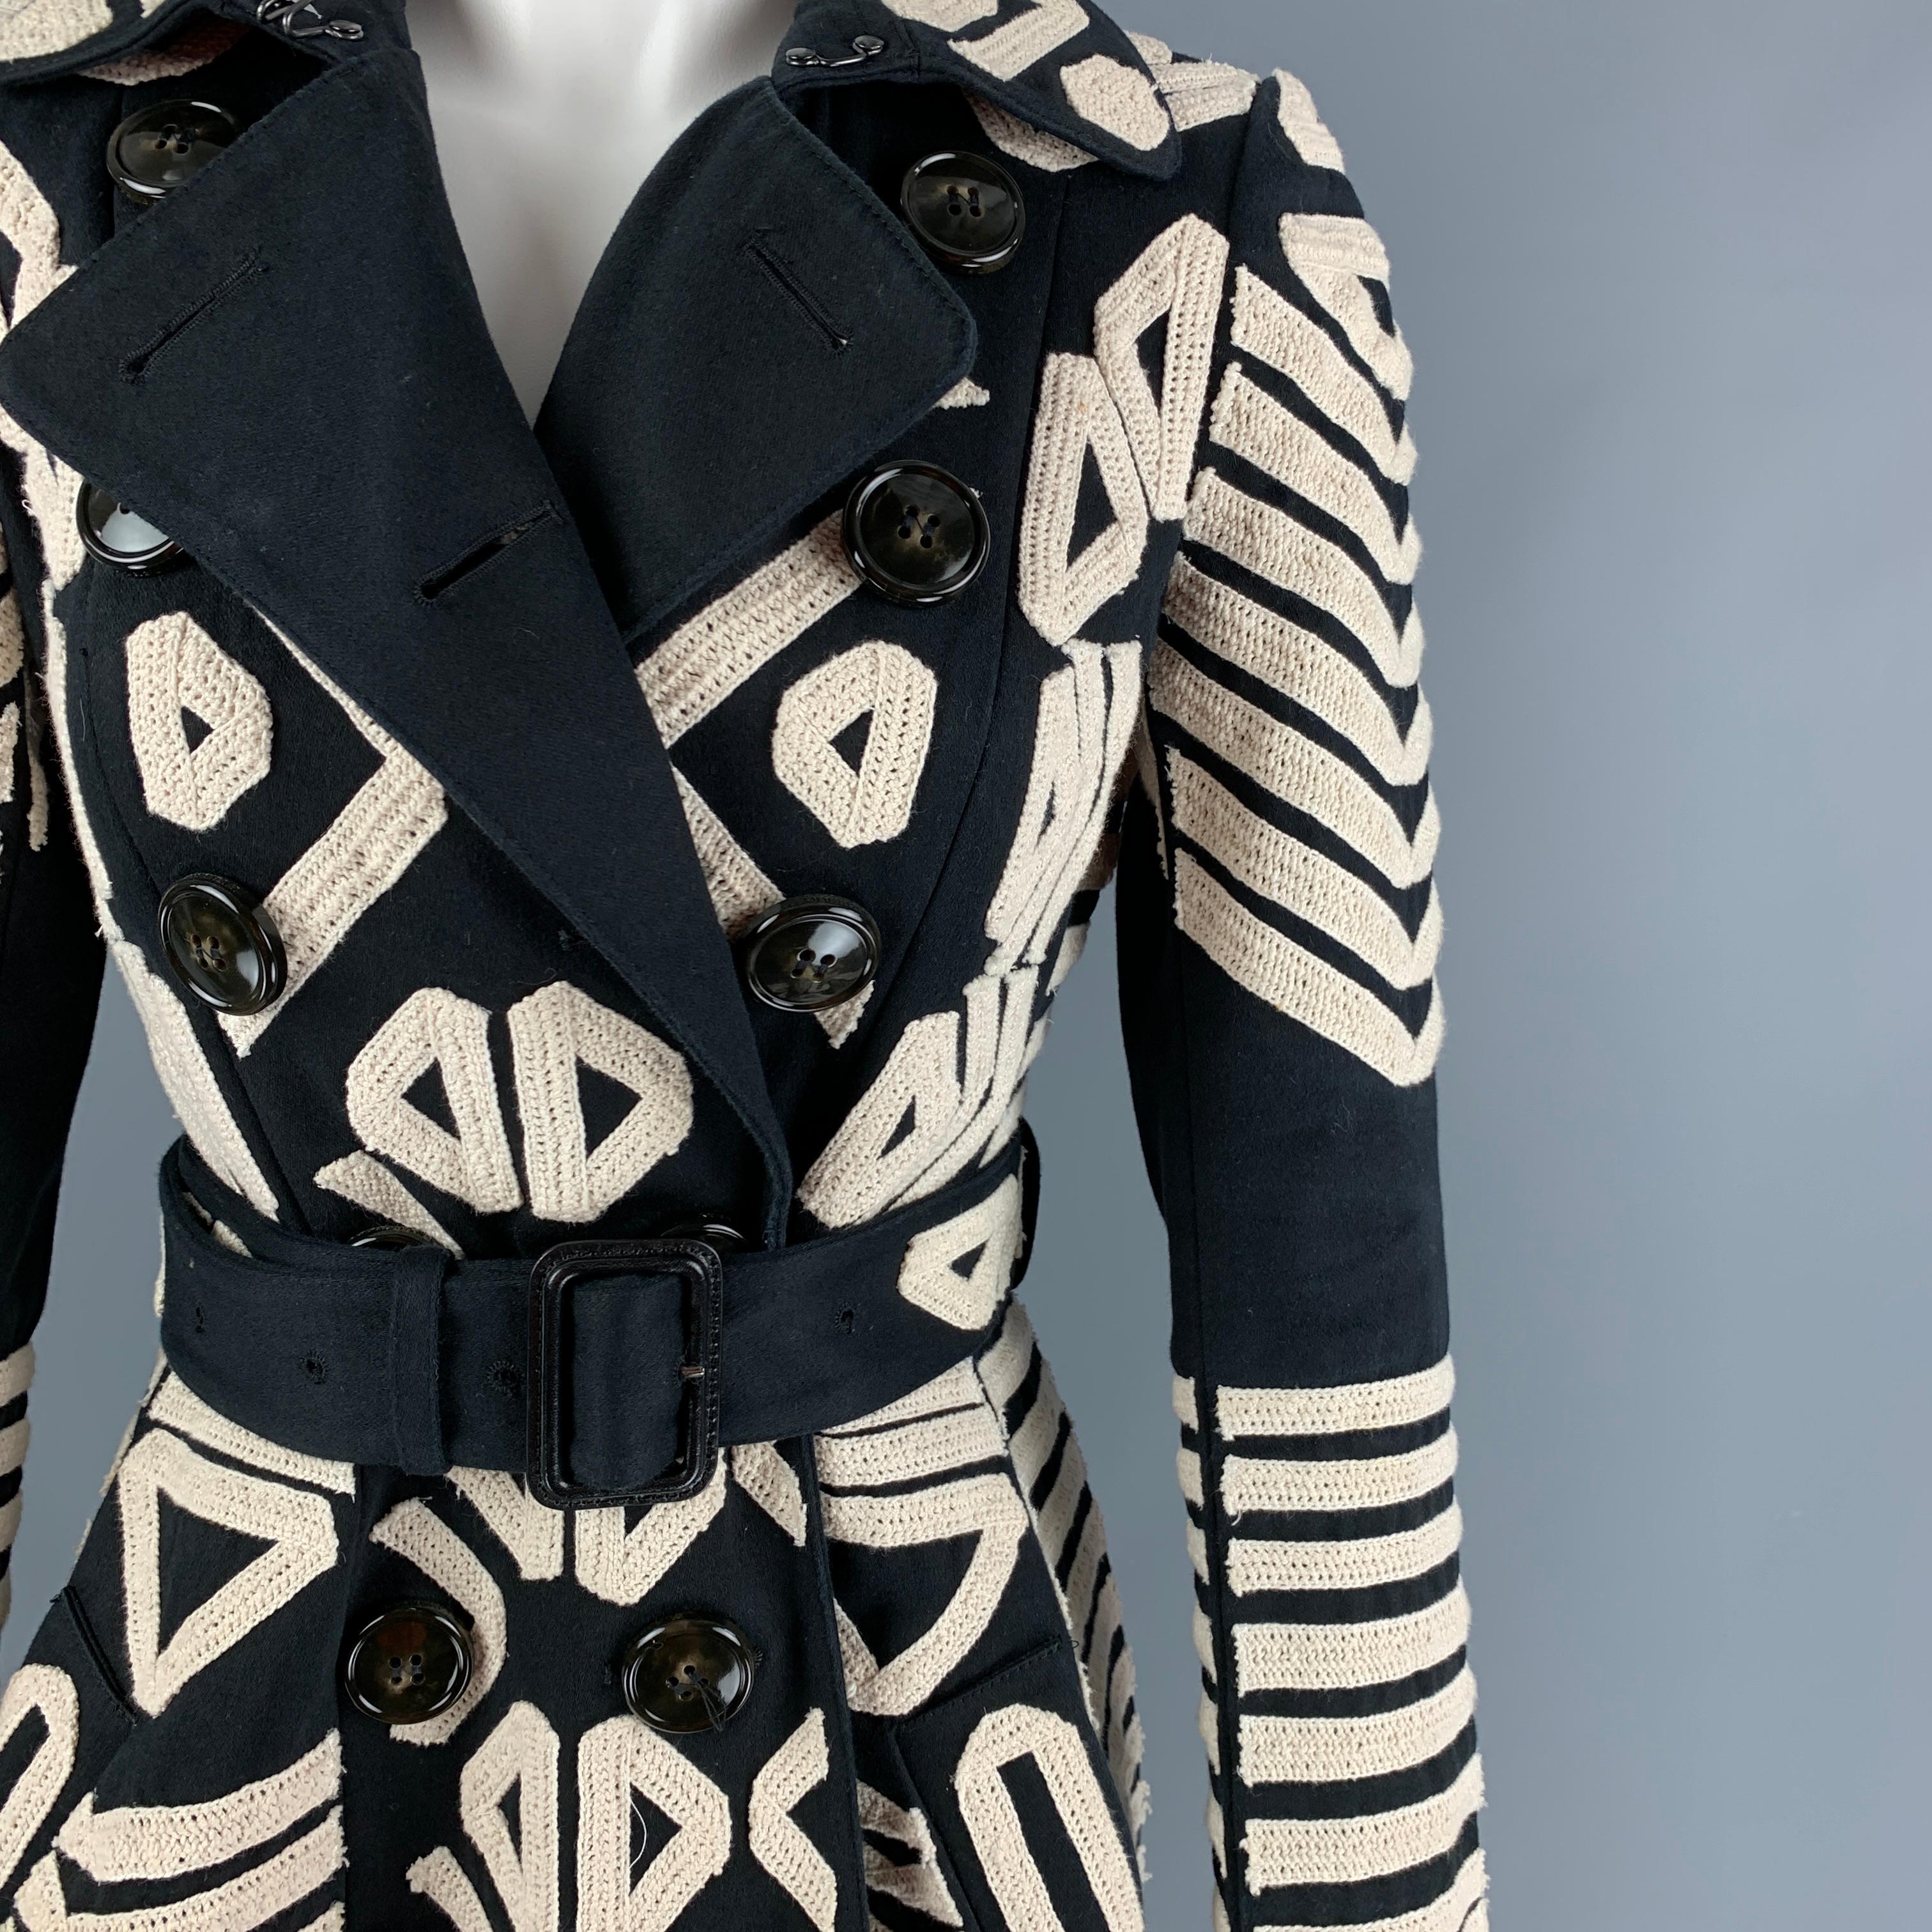 BURBERRY PRORSUM 2016 coat comes in a black & white cotton with embroidery designs throughout featuring a belted style, full liner, single back vent, slit pockets, and a double breasted closure. Made in Italy. 

Very Good Pre-Owned Condition. Light